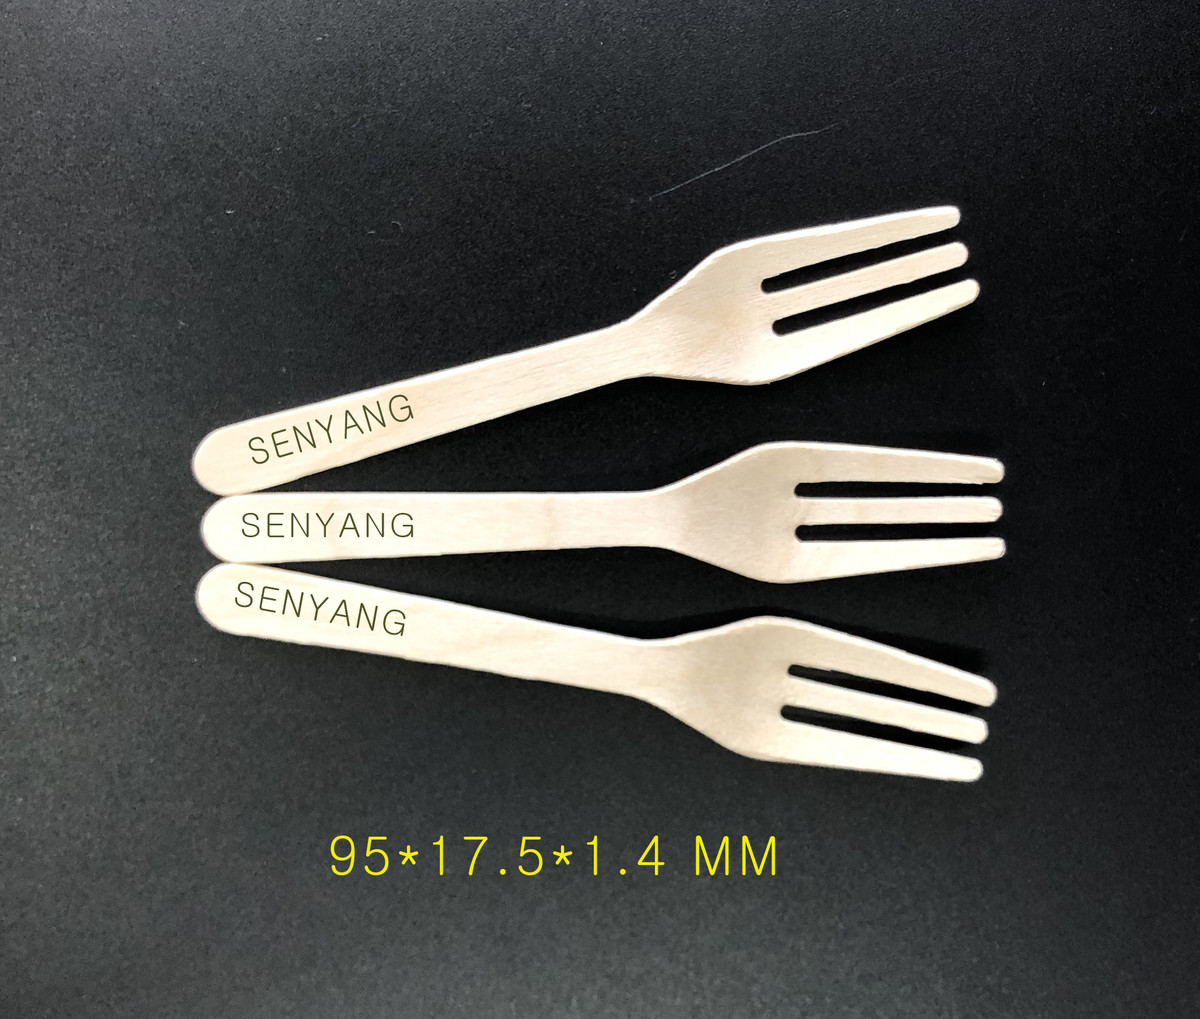 Birch wood disposable fork with special design: 95 mm fork with extra long teeth from Tianjin Senyangwood Co., Limited